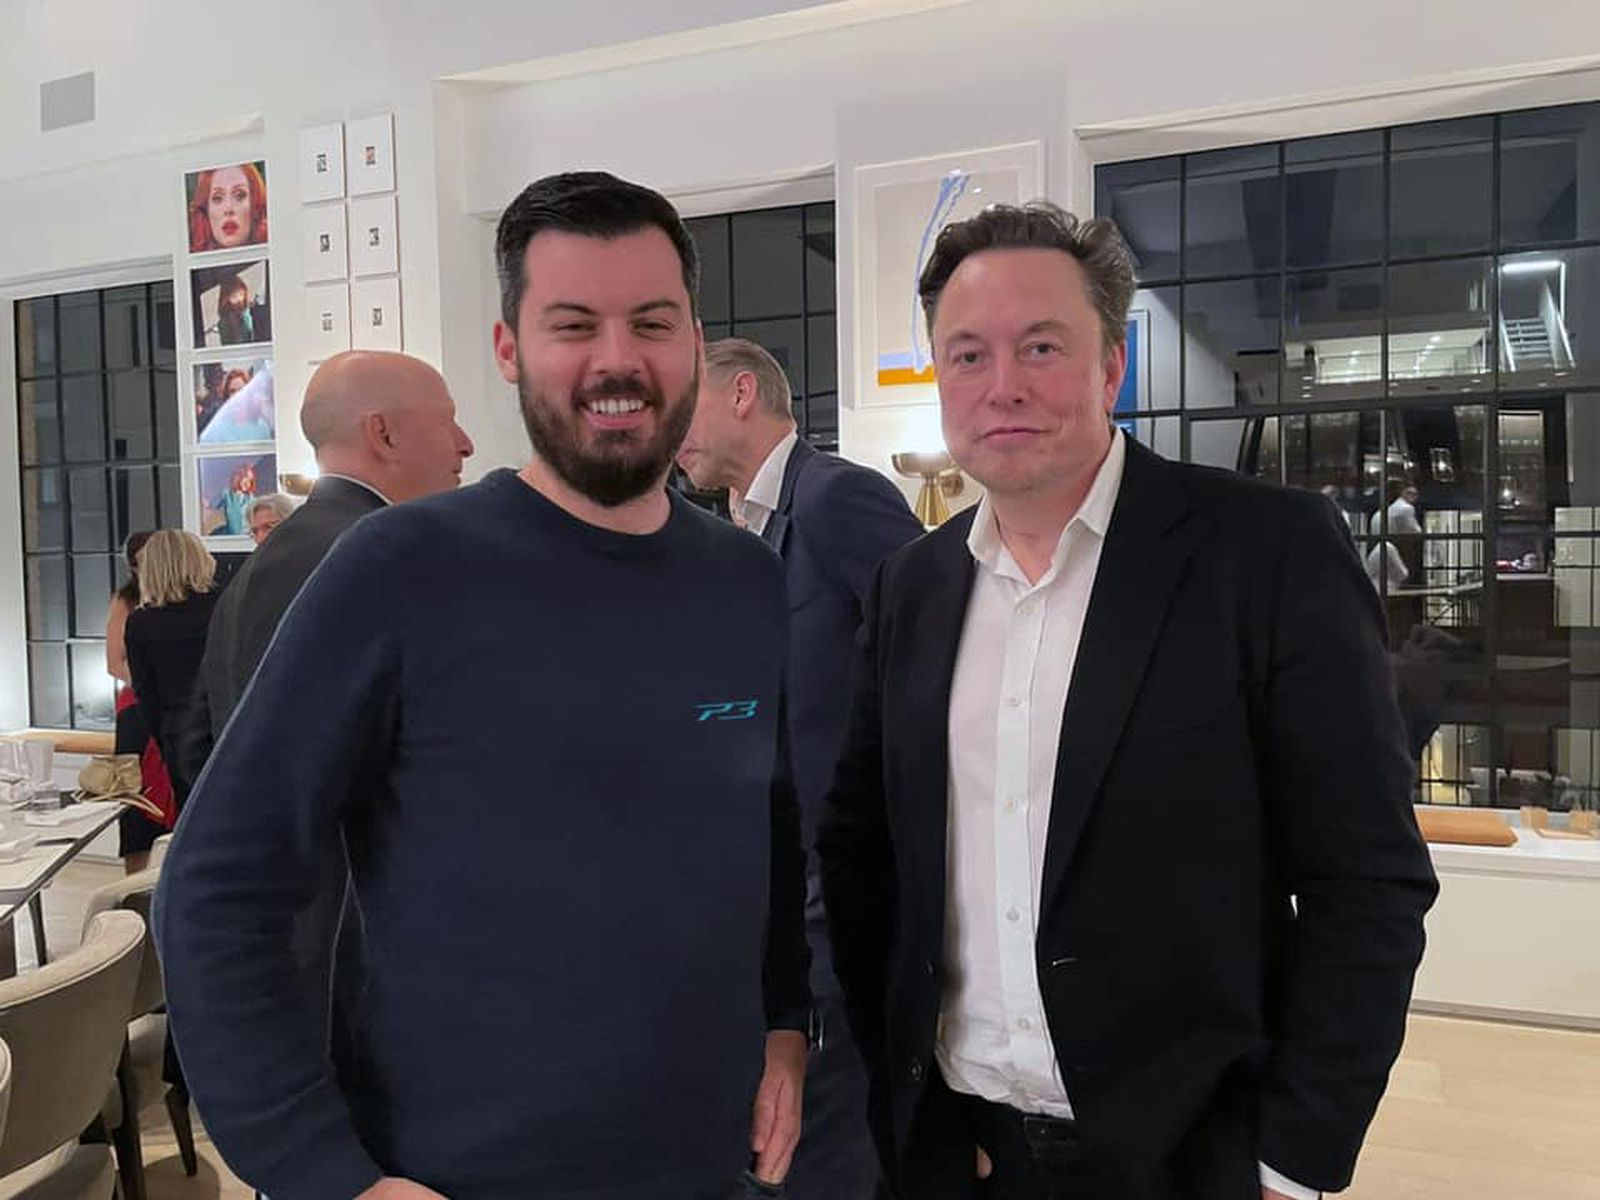 Mate Rimac and Elon Musk hang out in New York